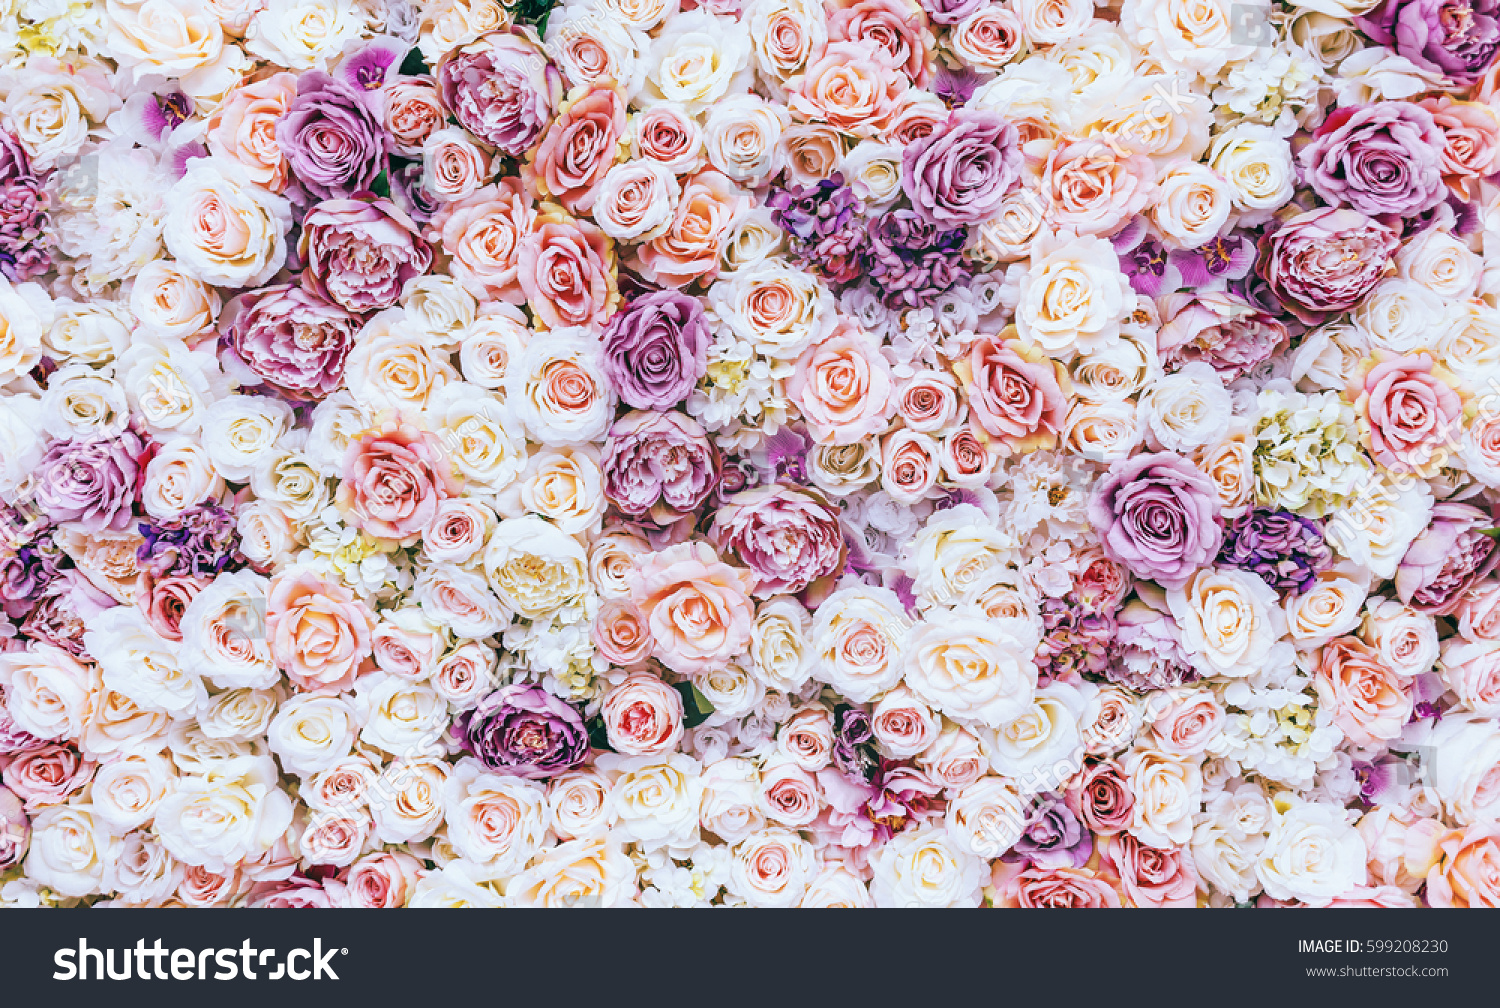 Flowers wall background with amazing red and white roses, Wedding decoration, hand made. Toning #599208230